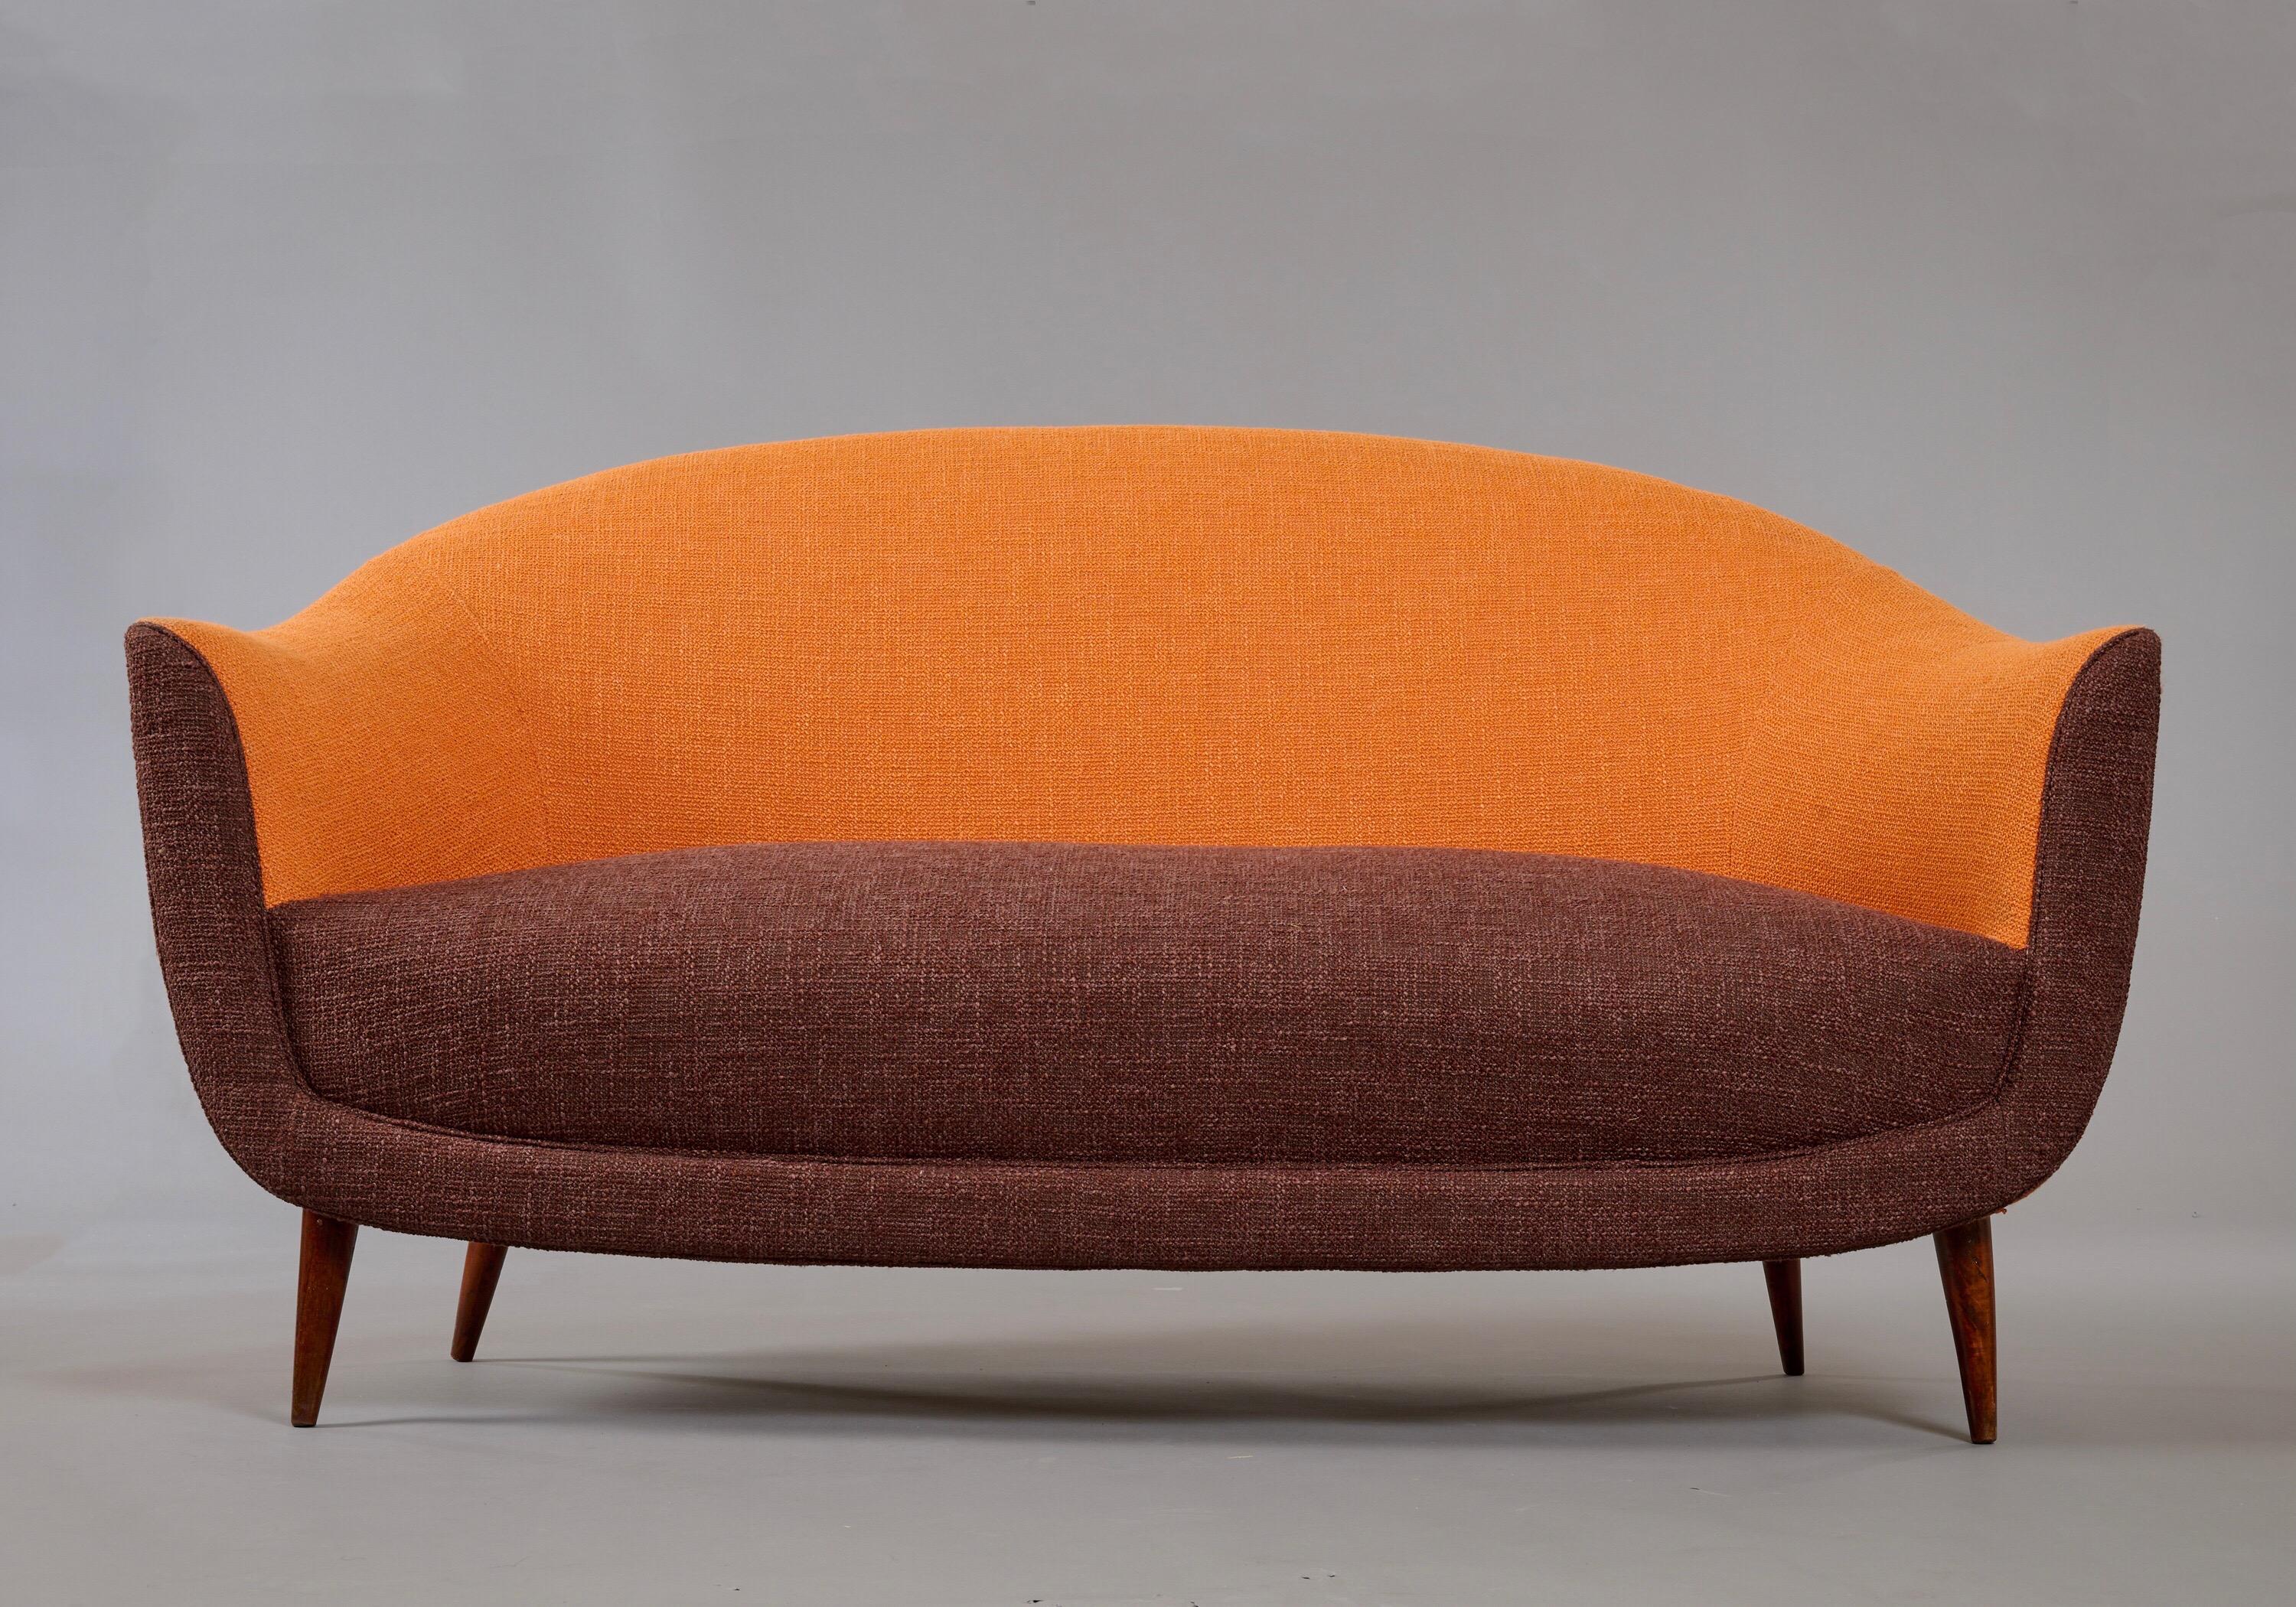 Italy, 1950's.

A charming curved sofa in the style of Federico Munari, with a comfortable, high sloped back and rounded, elegantly tapering arms, raised on conical wood legs. Newly reupholstered in contrasting burnt sienna and chocolate cotton